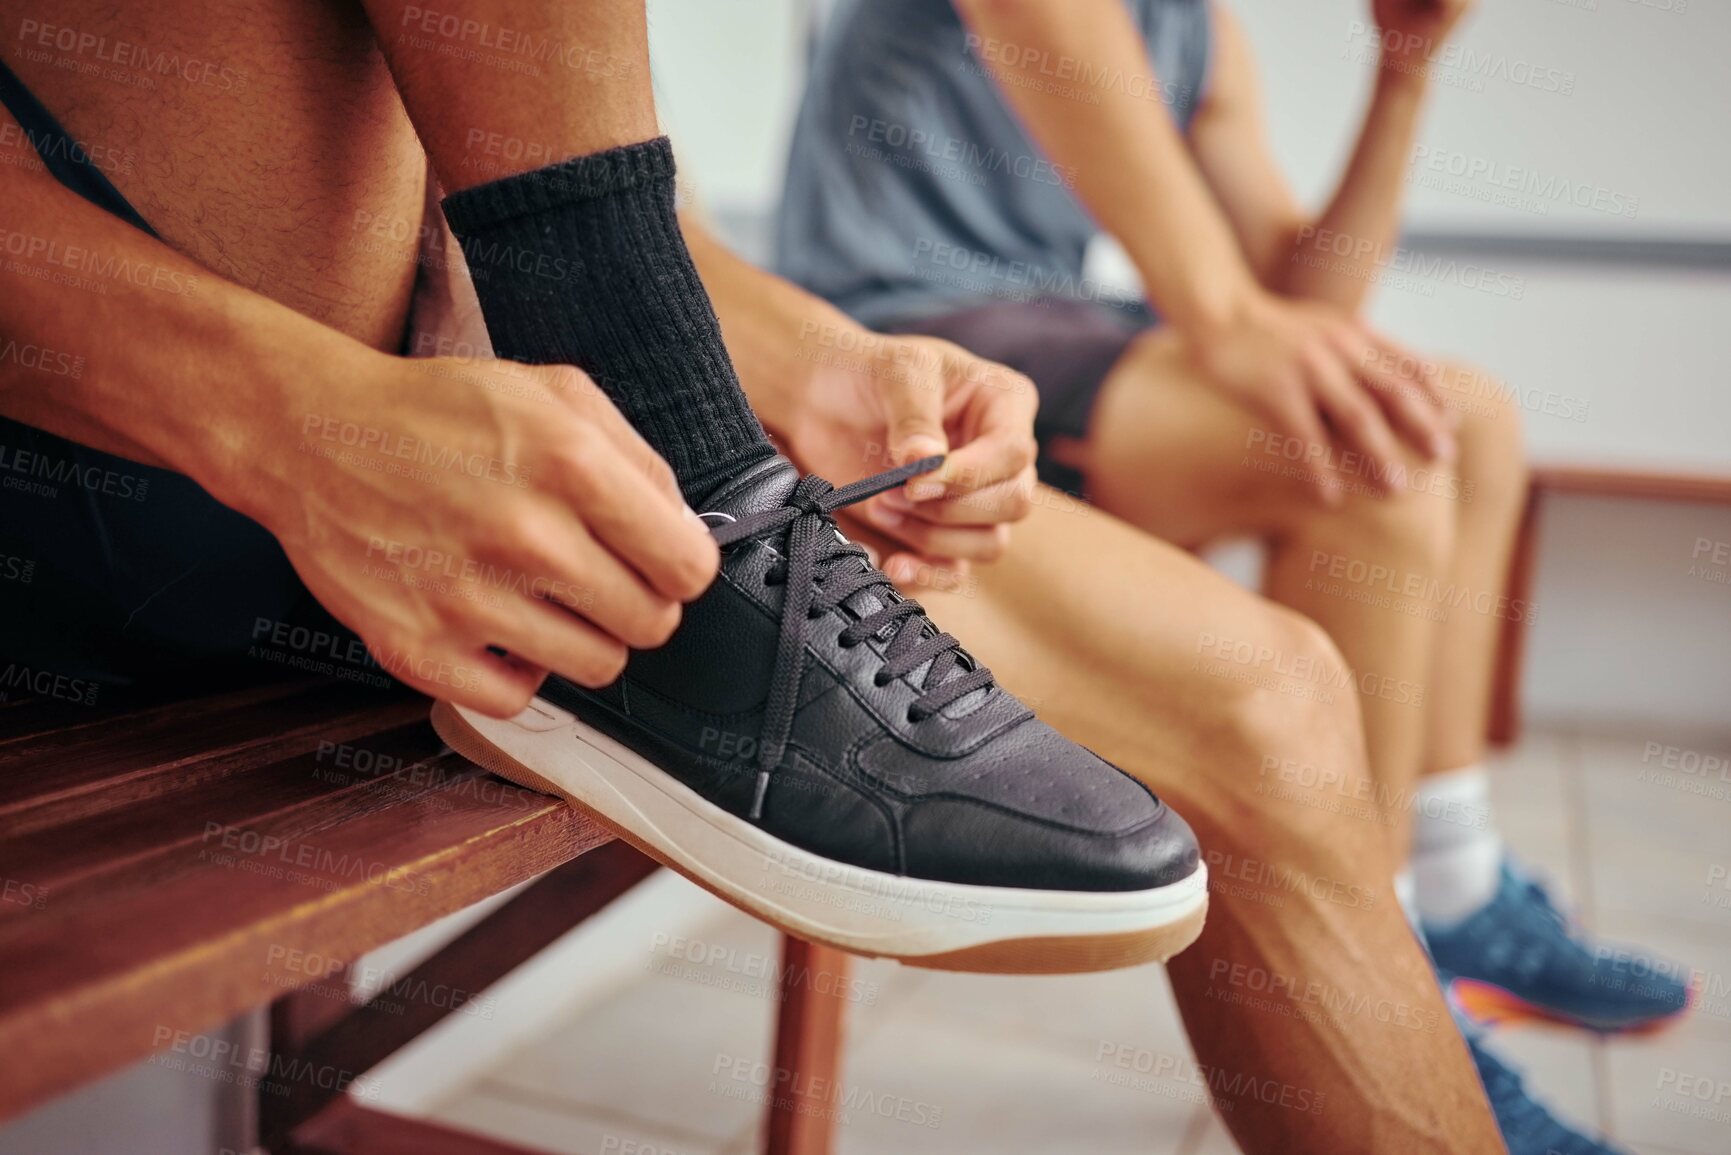 Buy stock photo Squash player tying his shoe lace. Hands of a fit athlete getting ready for a squash match. Closeup of a player tying the laces of his sport sneaker. Player sitting on a bench with his friend.